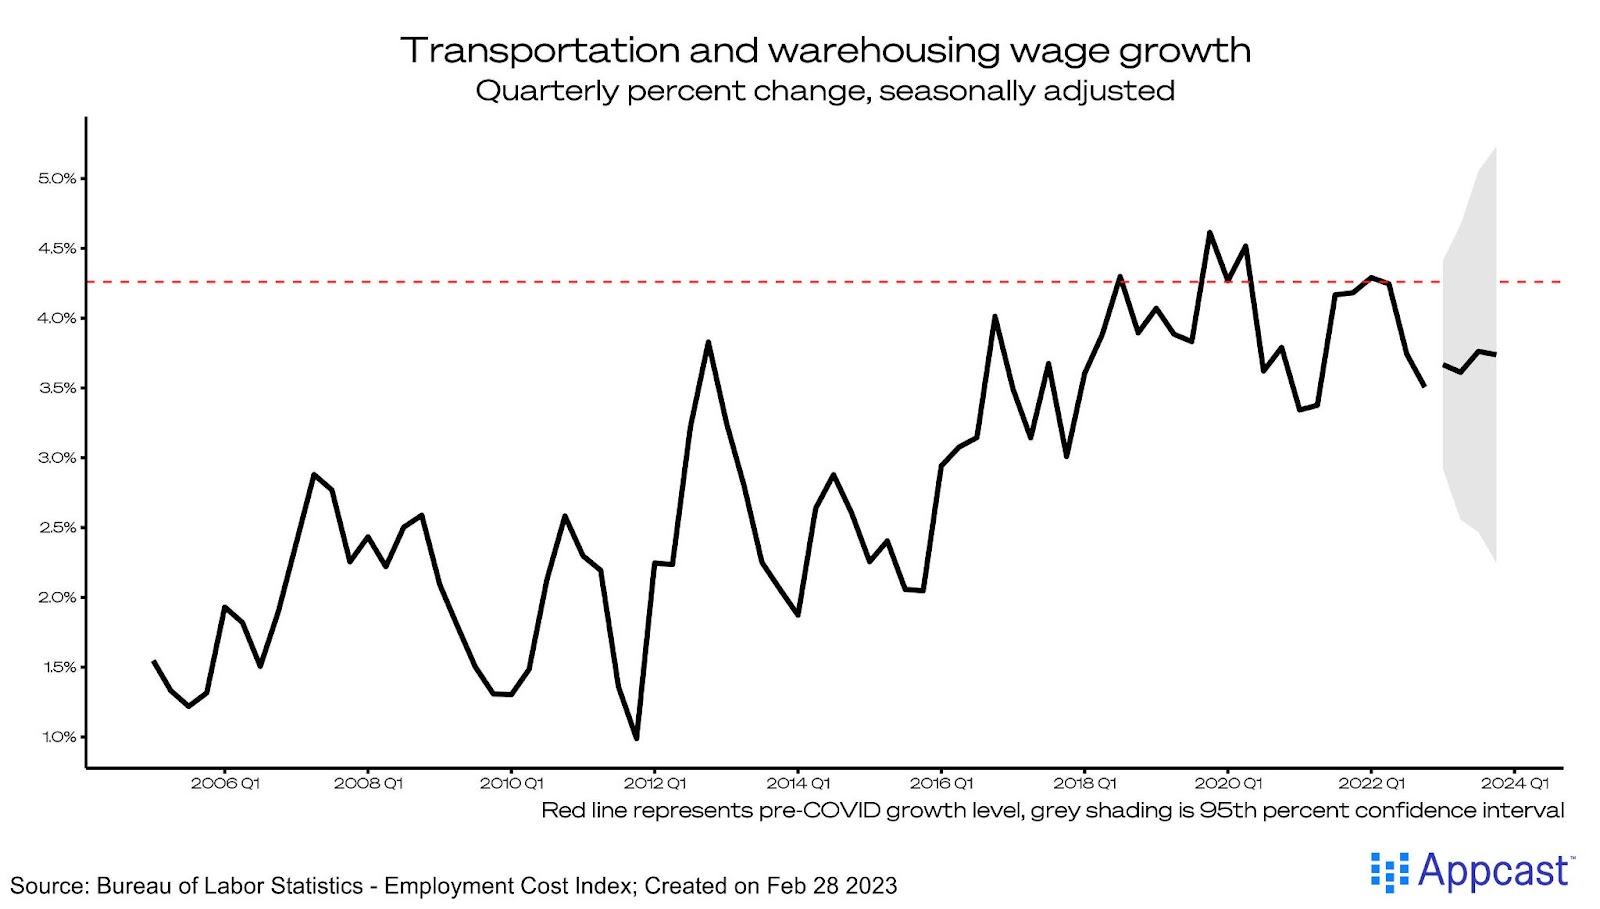 Transportation and warehousing wage growth shown as a quarterly percent change starting in 2005 and forecasted out to 2024. Wage growth is set to grow slightly after reaching dipping in 2022, rebalancing slightly. Created on February 28, 2023 for Appcast. 